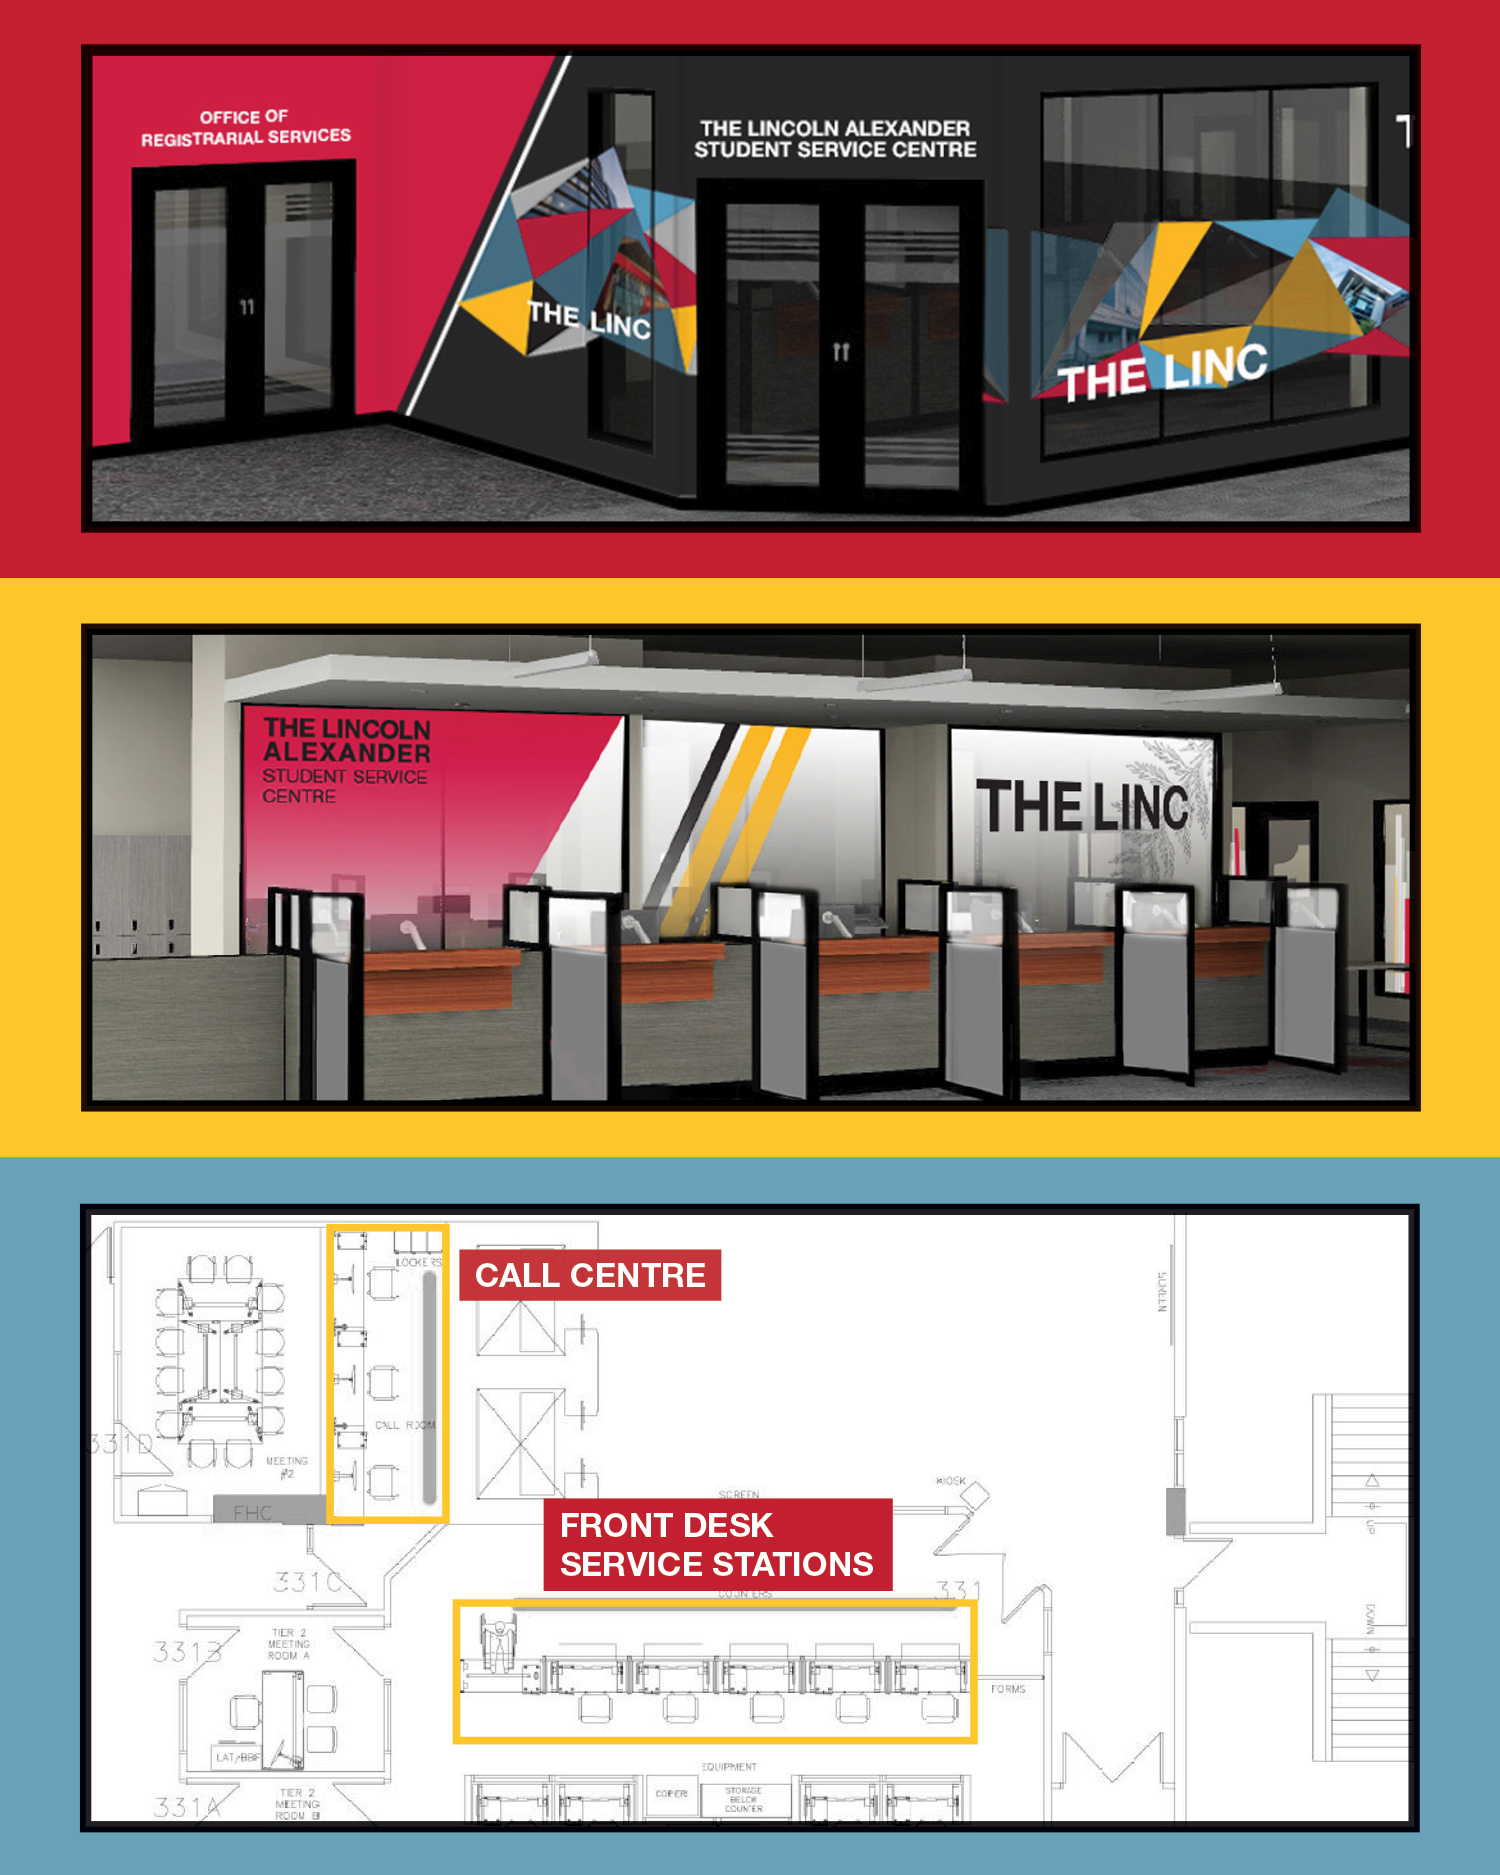 Design renderings and floorplan of the new One-Stop Student Service Centre